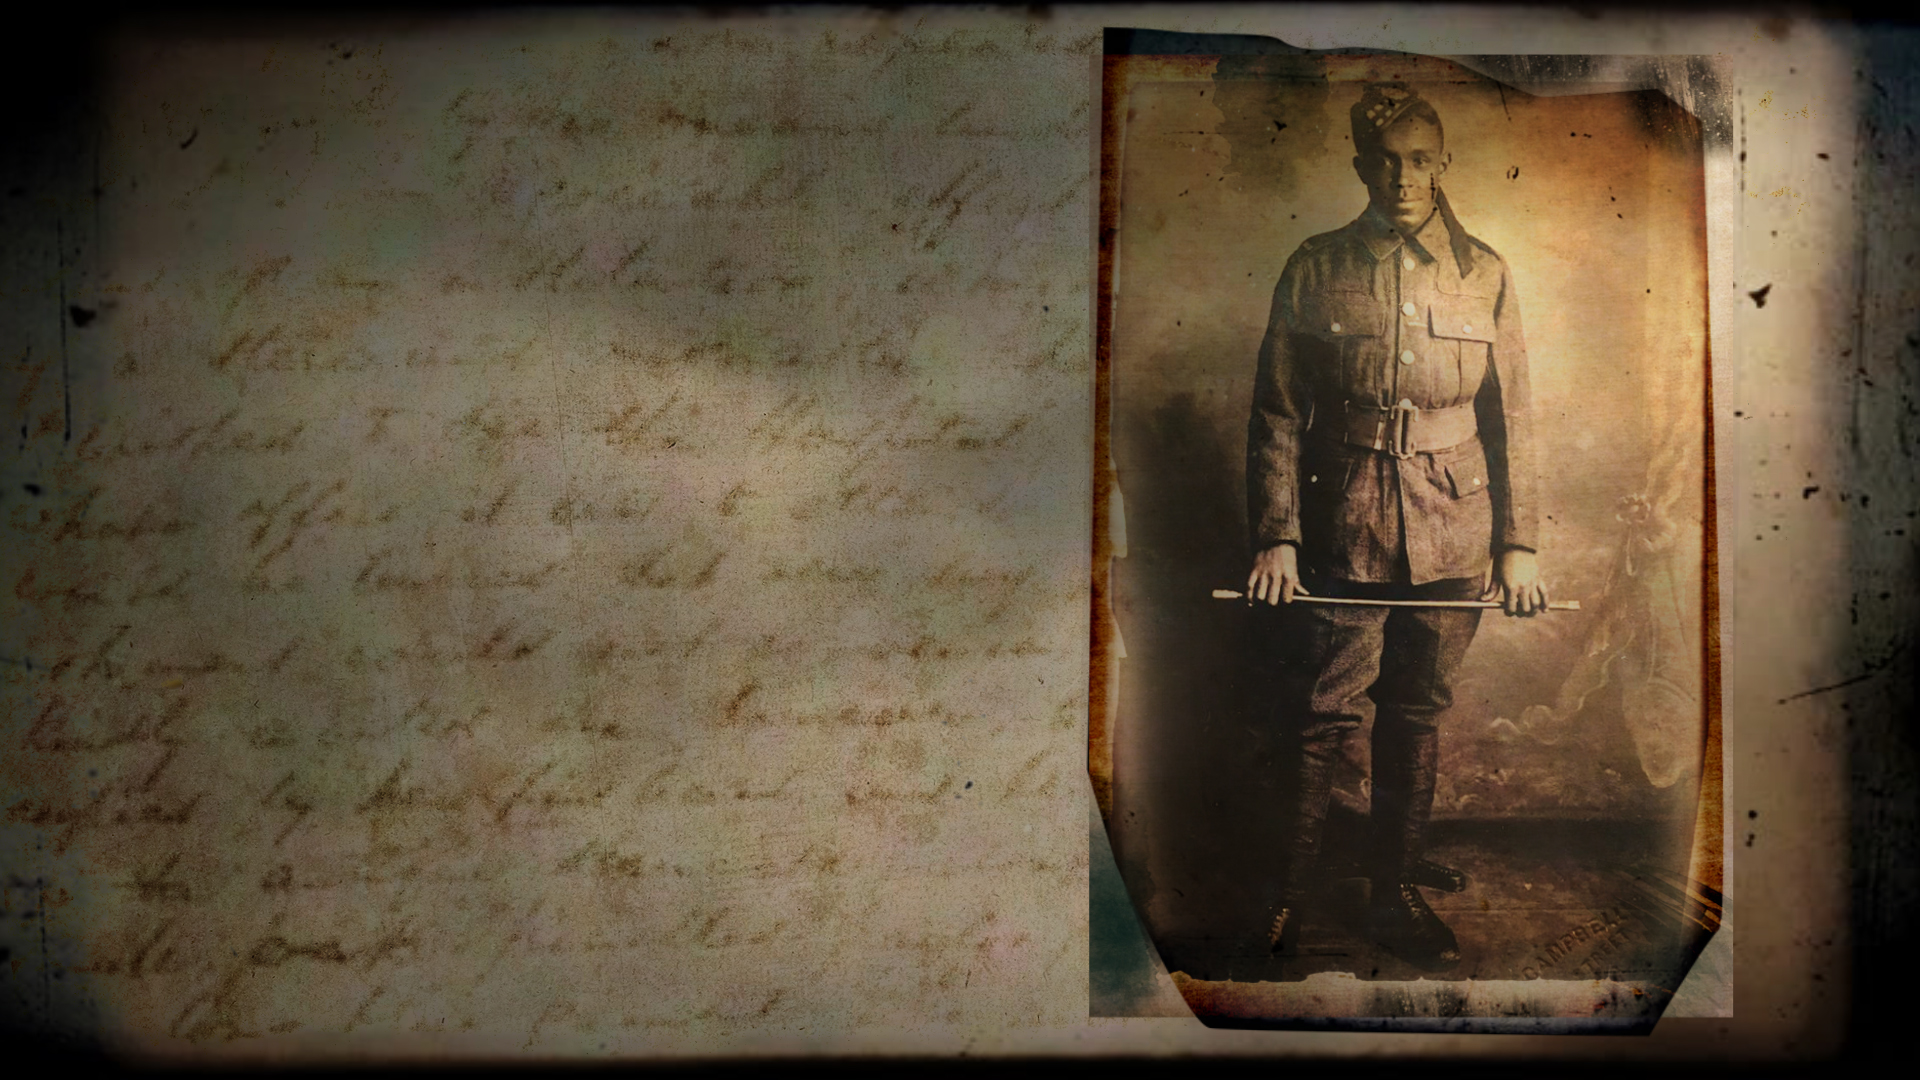 SCOTTISH SOLDIER: A LOST DIARY OF WW1